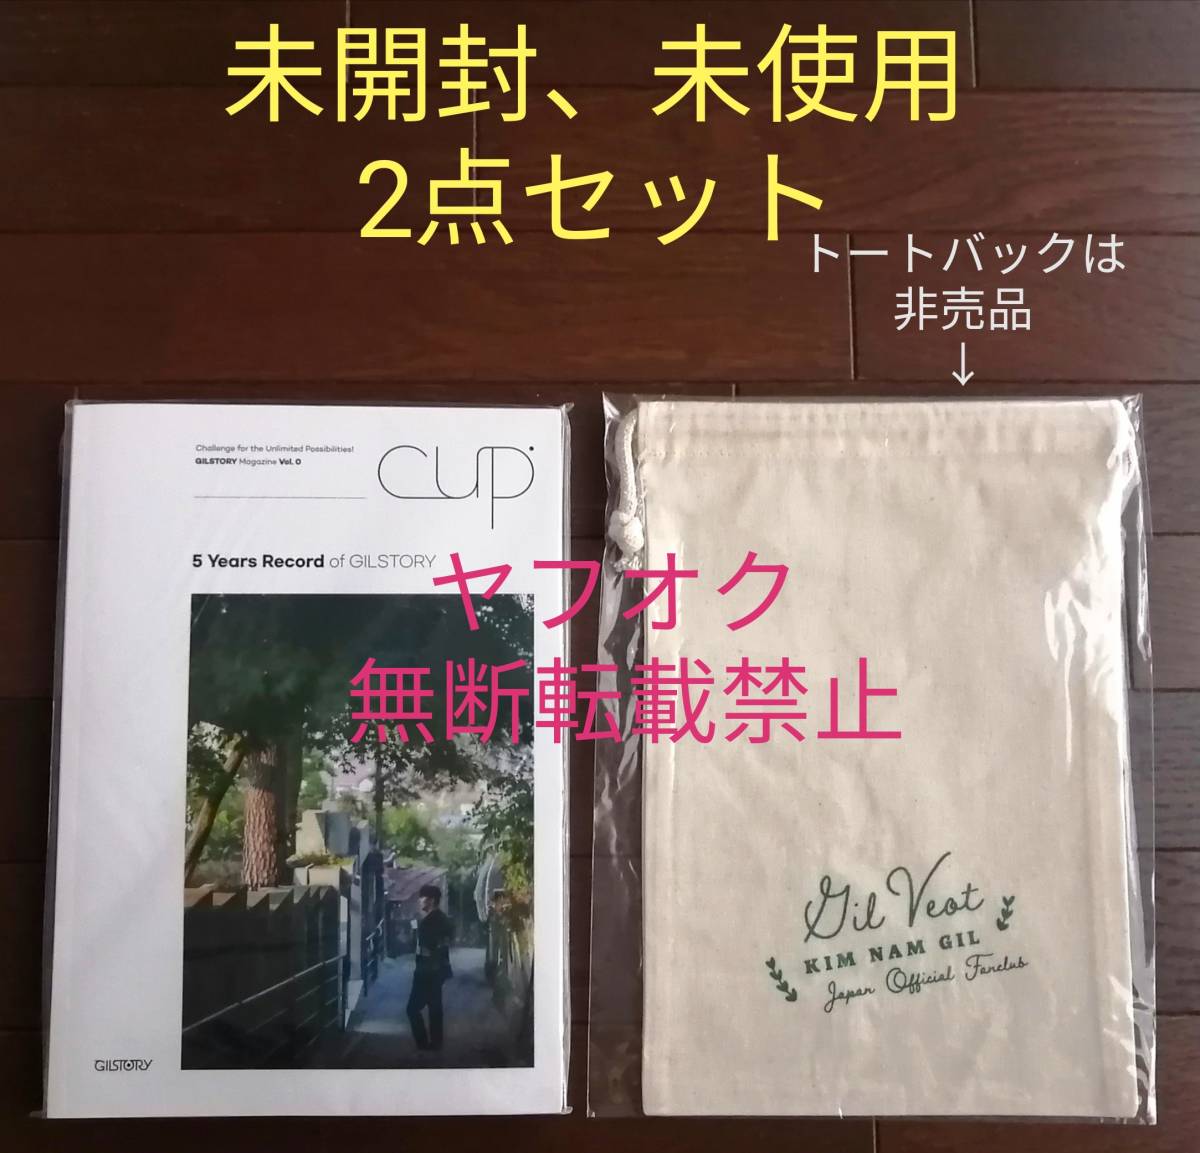 Buy it now [Set of 2] Kim Nam Gil Official fan club not for sale tote bag (updated goods) CUP first issue GILSTORY 5th anniversary photo essay, Photo album, male talent, others